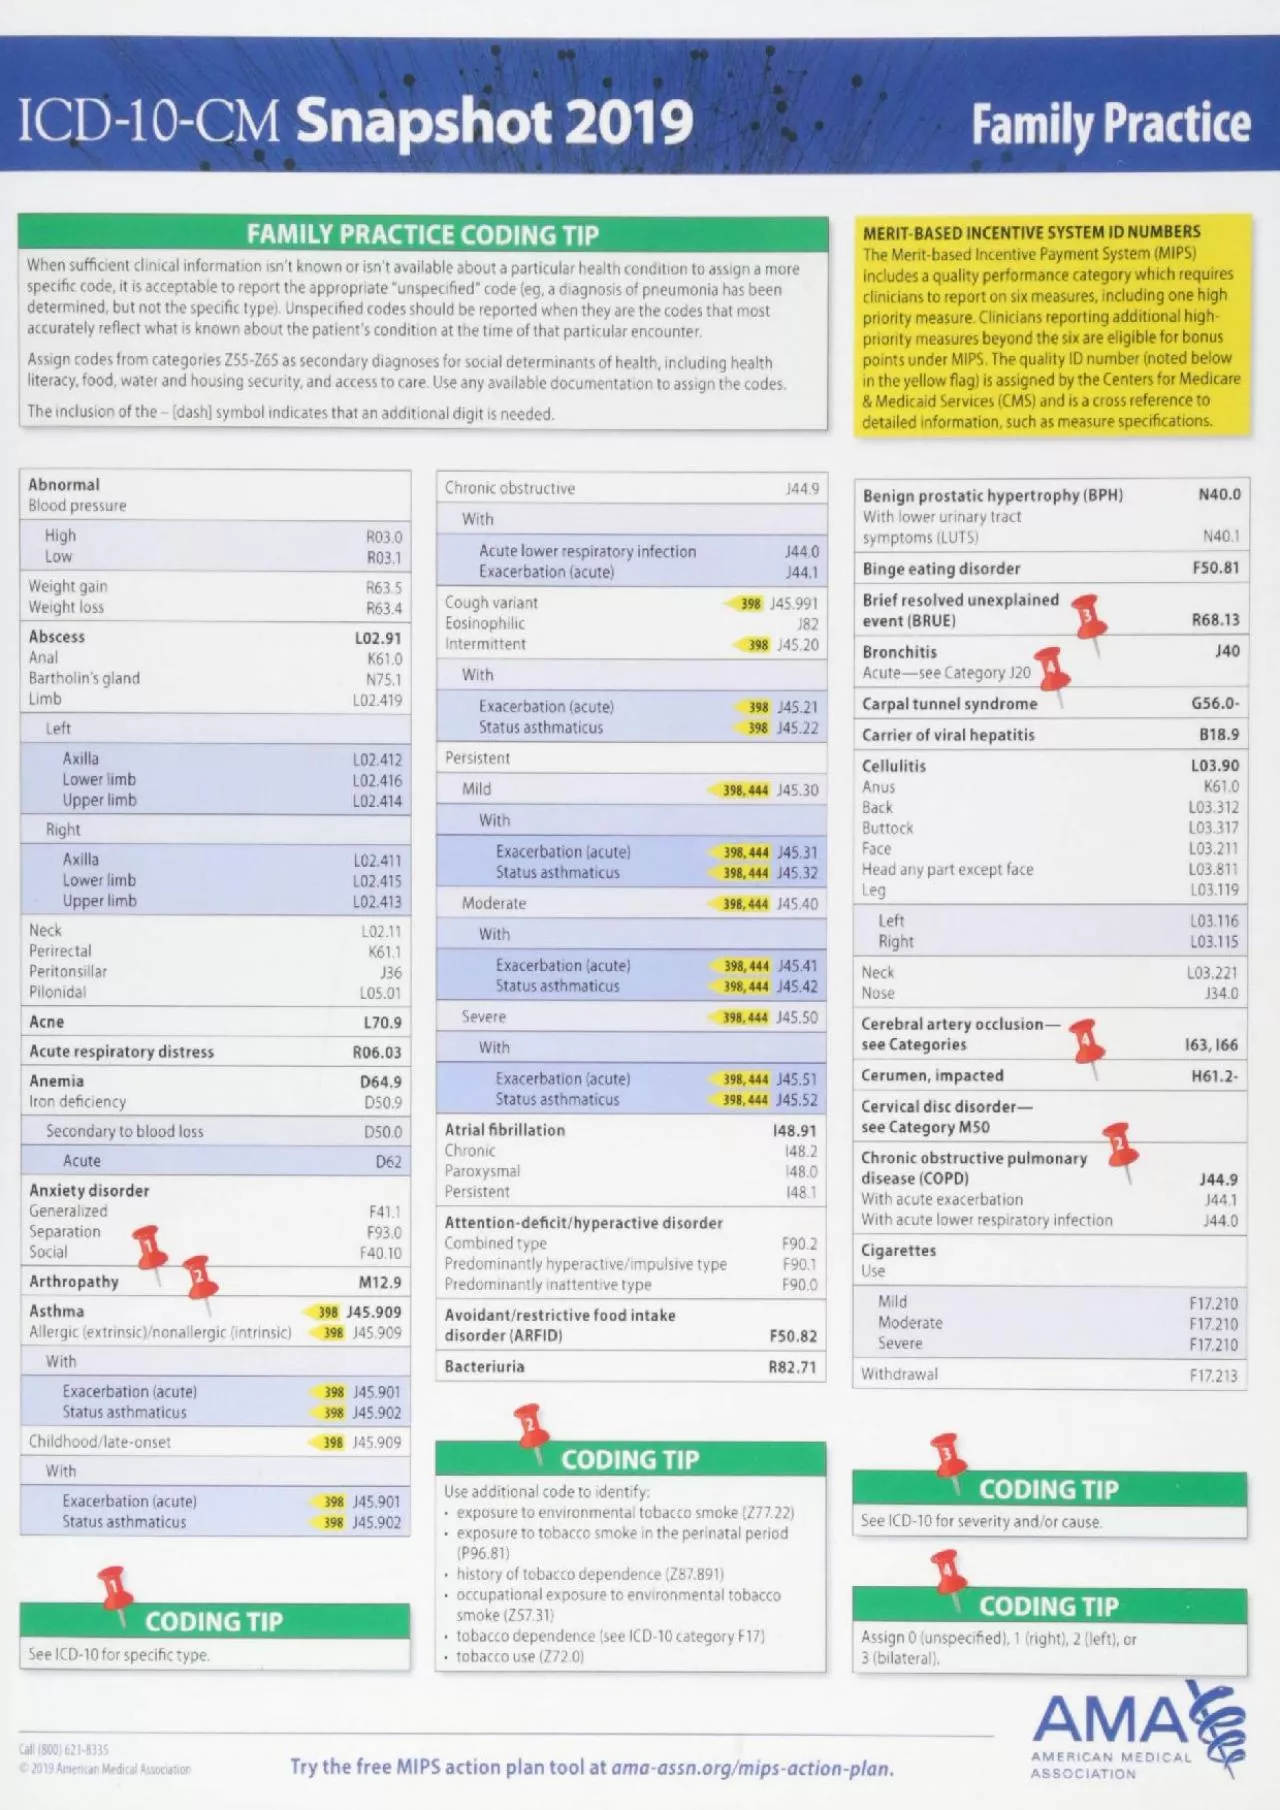 (DOWNLOAD)-ICD-10-CM 2019 Snapshot Coding Card: Family Practice